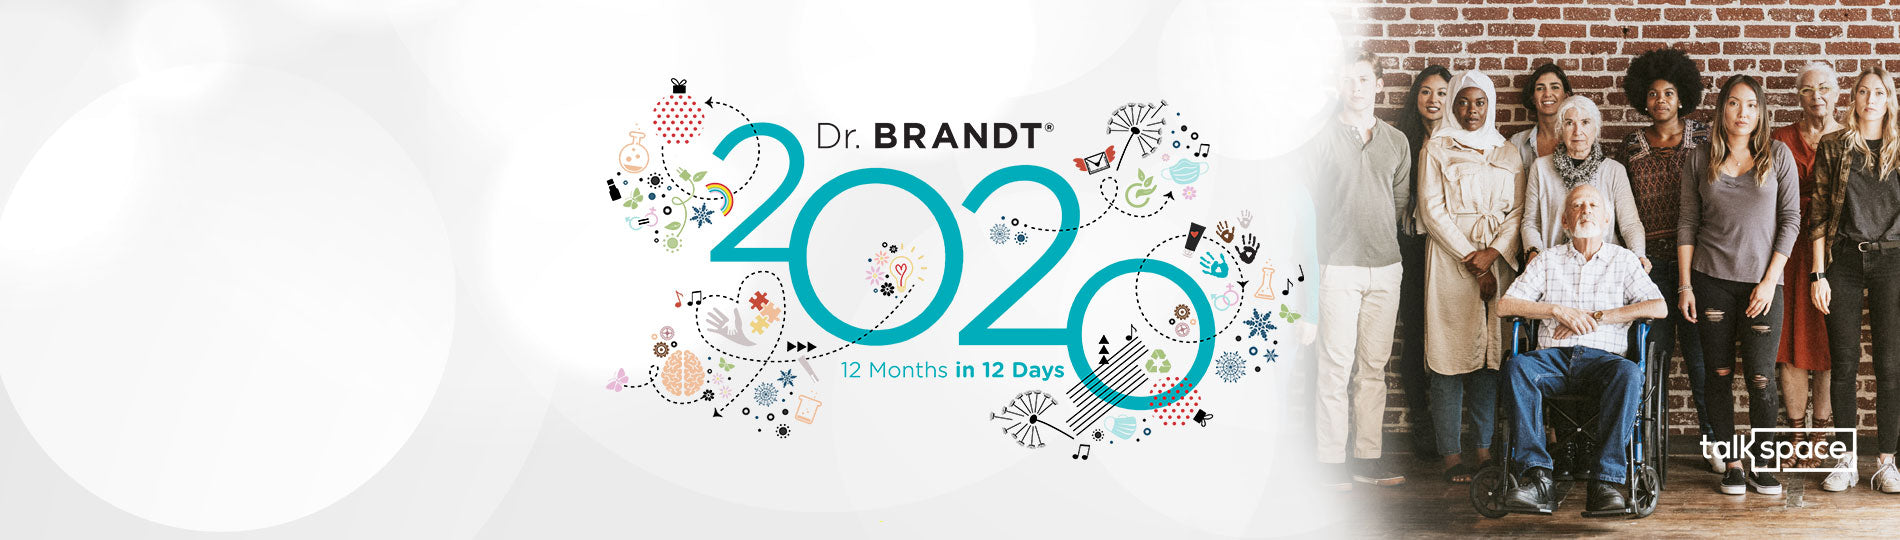 September: How Dr. BRANDT® and the community partnered together to raise awareness for mental health